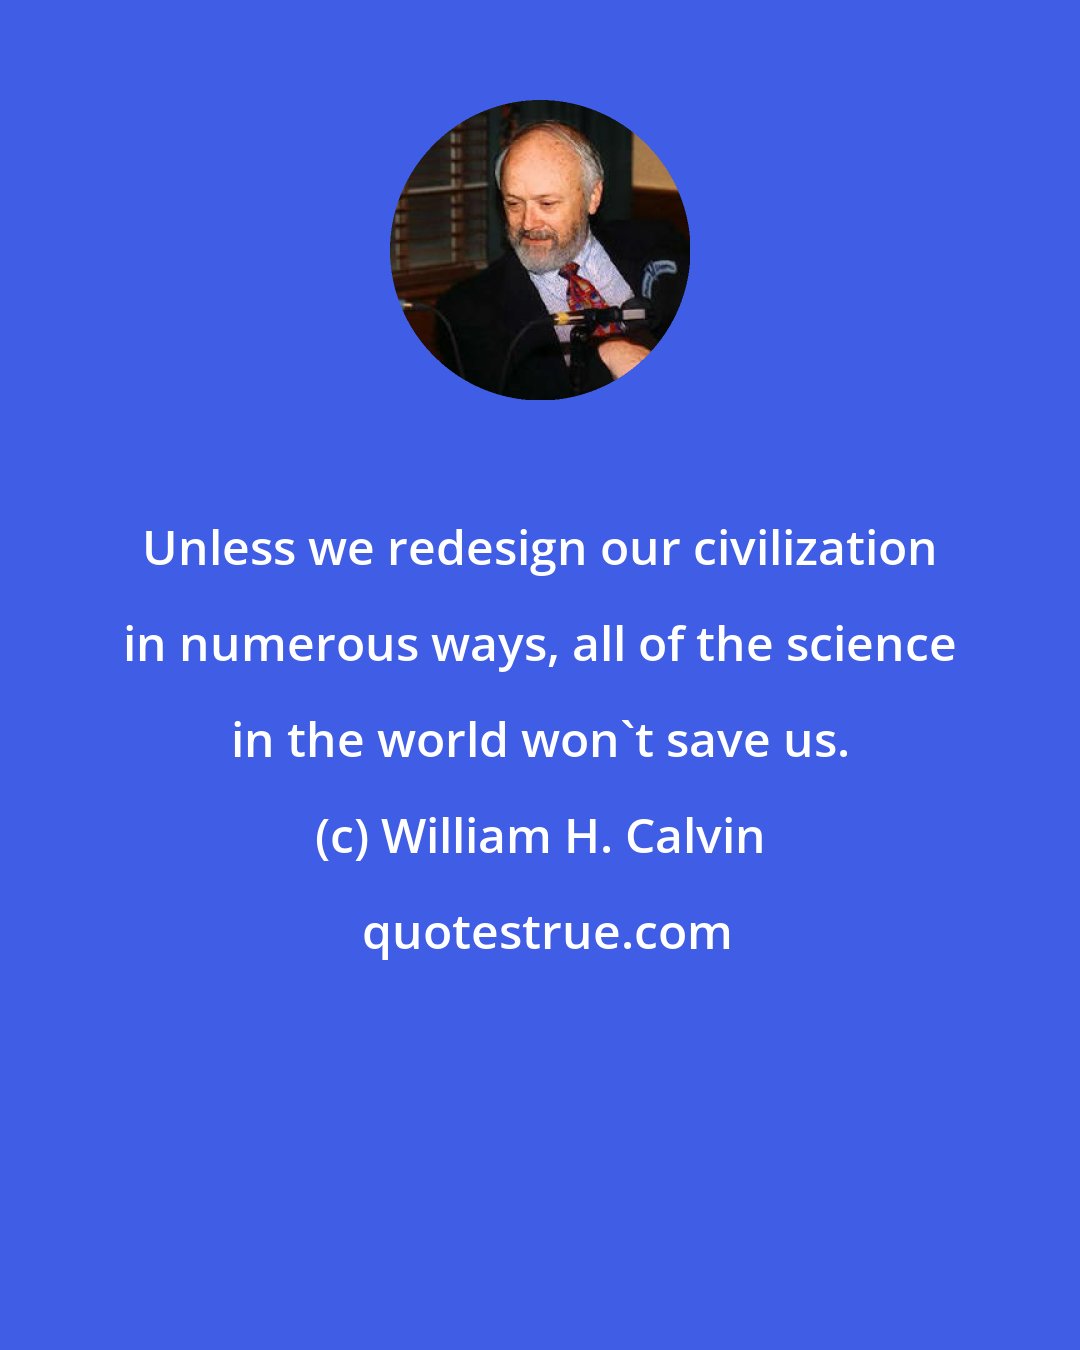 William H. Calvin: Unless we redesign our civilization in numerous ways, all of the science in the world won't save us.